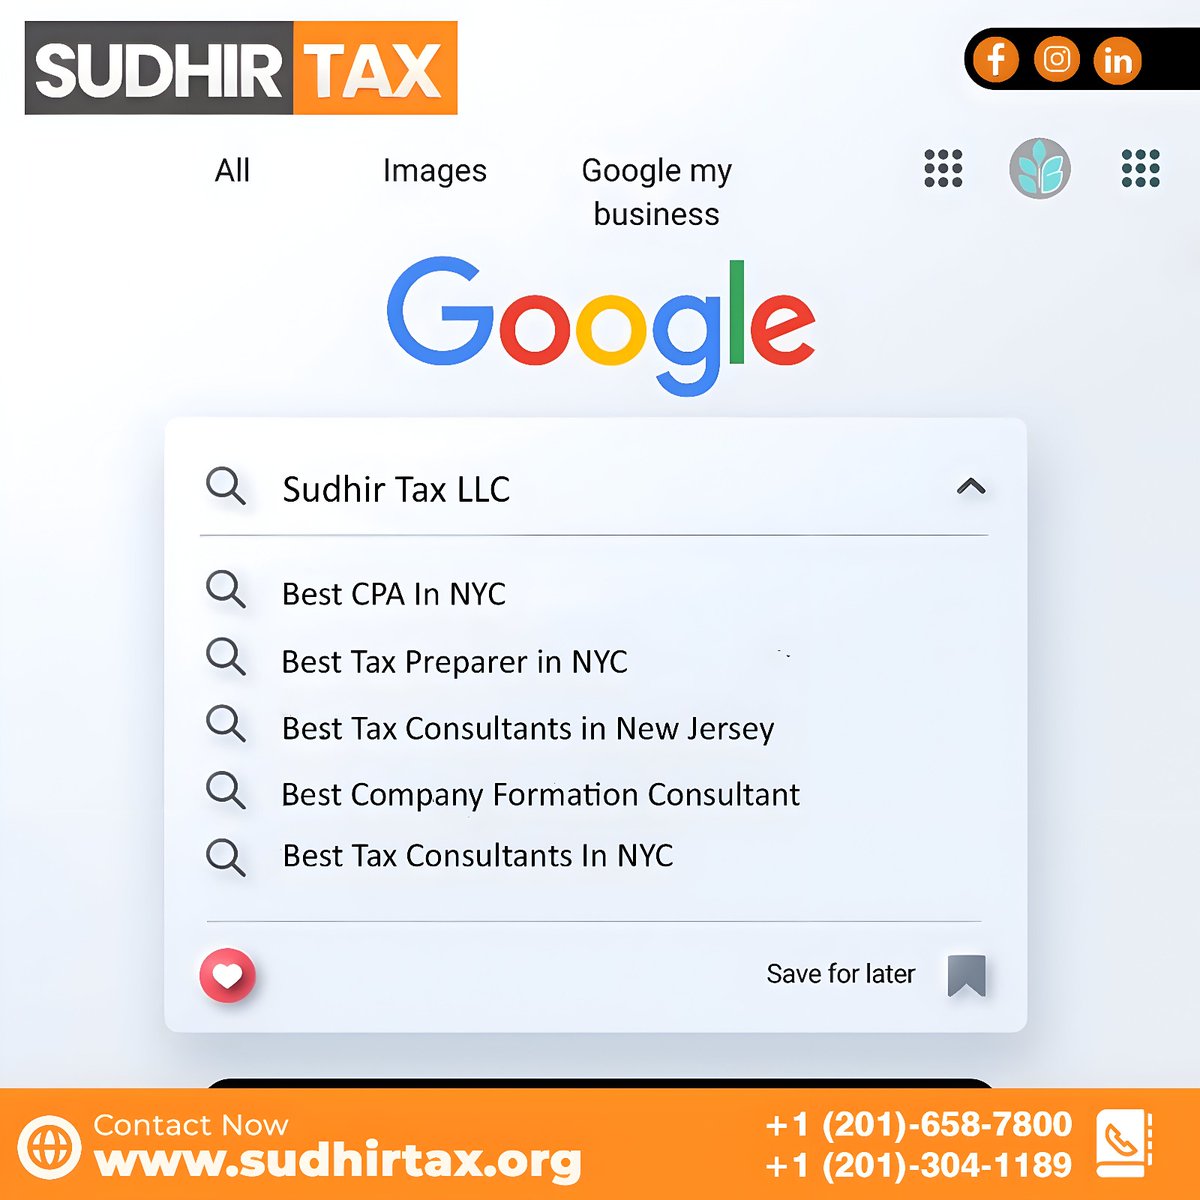 Discover excellence with Sudhir Tax LLC – your premier destination for top-notch tax and business services in NYC and New Jersey. 

Experience excellence today! 

#sudhirtax #taxexperts #nyc #newjersey #cpa #taxpreparation #companyformation #besttaxpreparer #besttaxconsultants